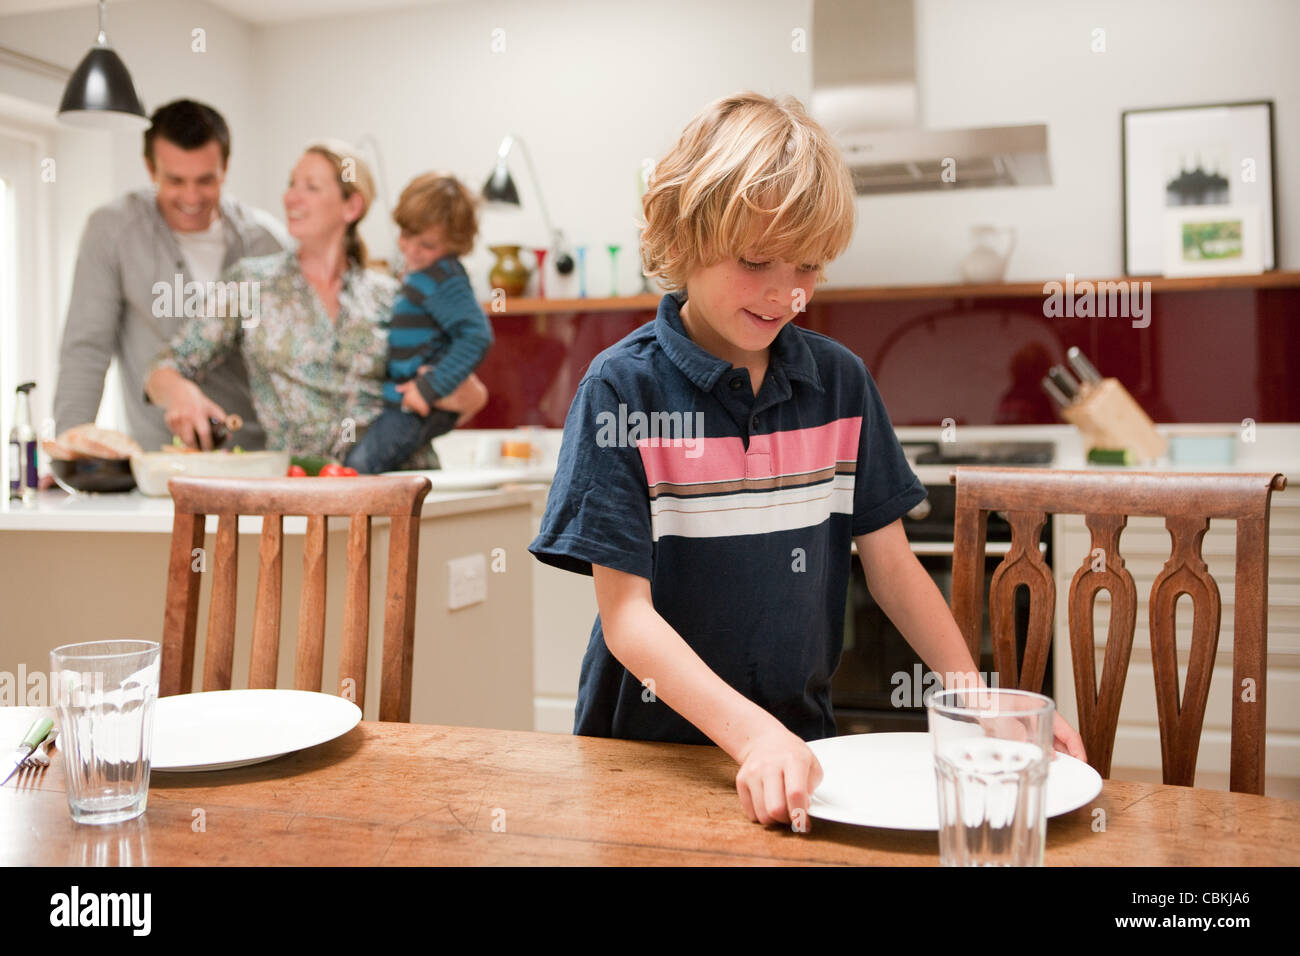 Son helping to lay table with parents and brother visible behind in kitchen Stock Photo